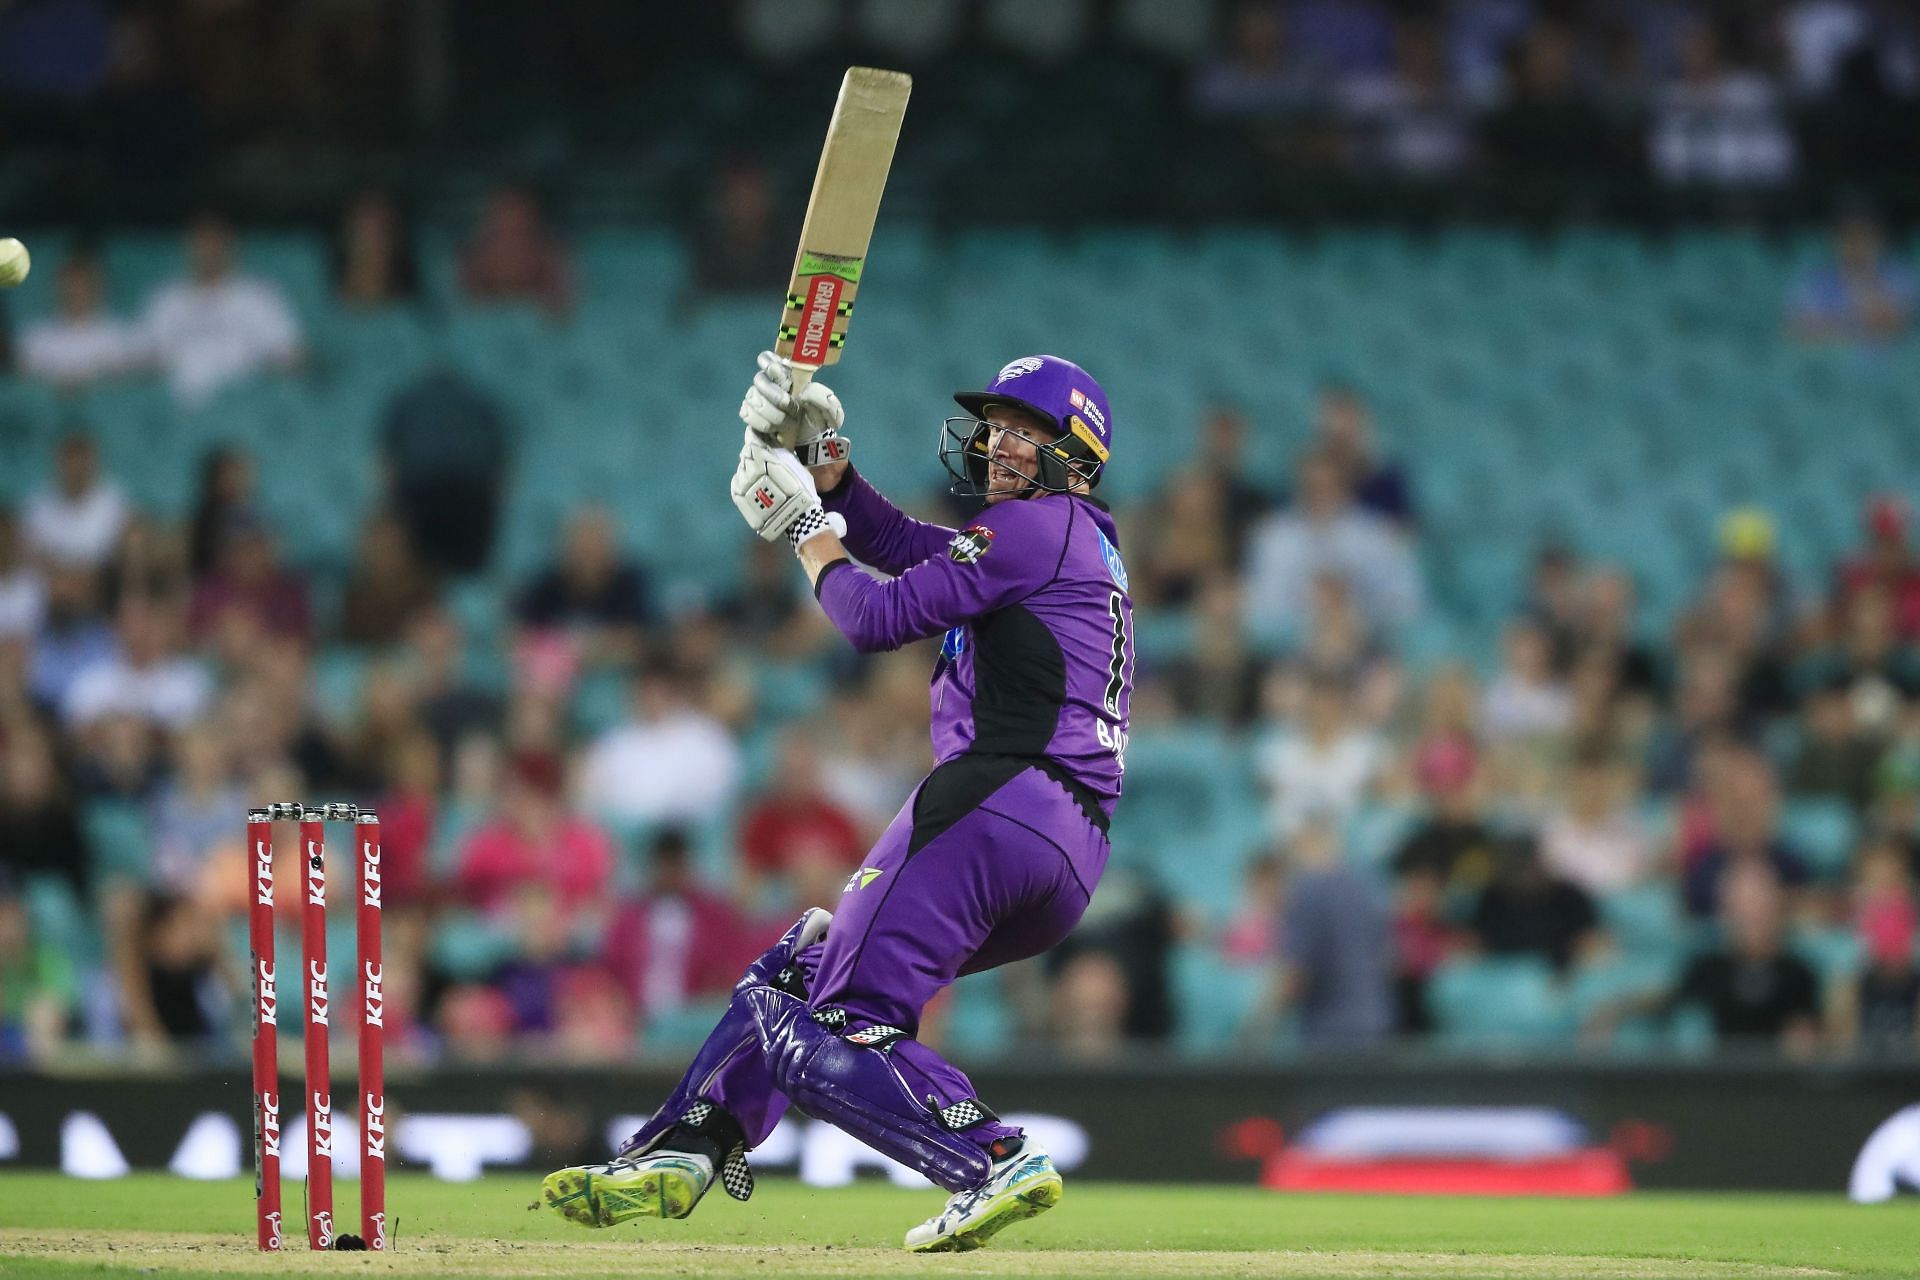 George Bailey batting in the BBL (Pic: Getty Images)